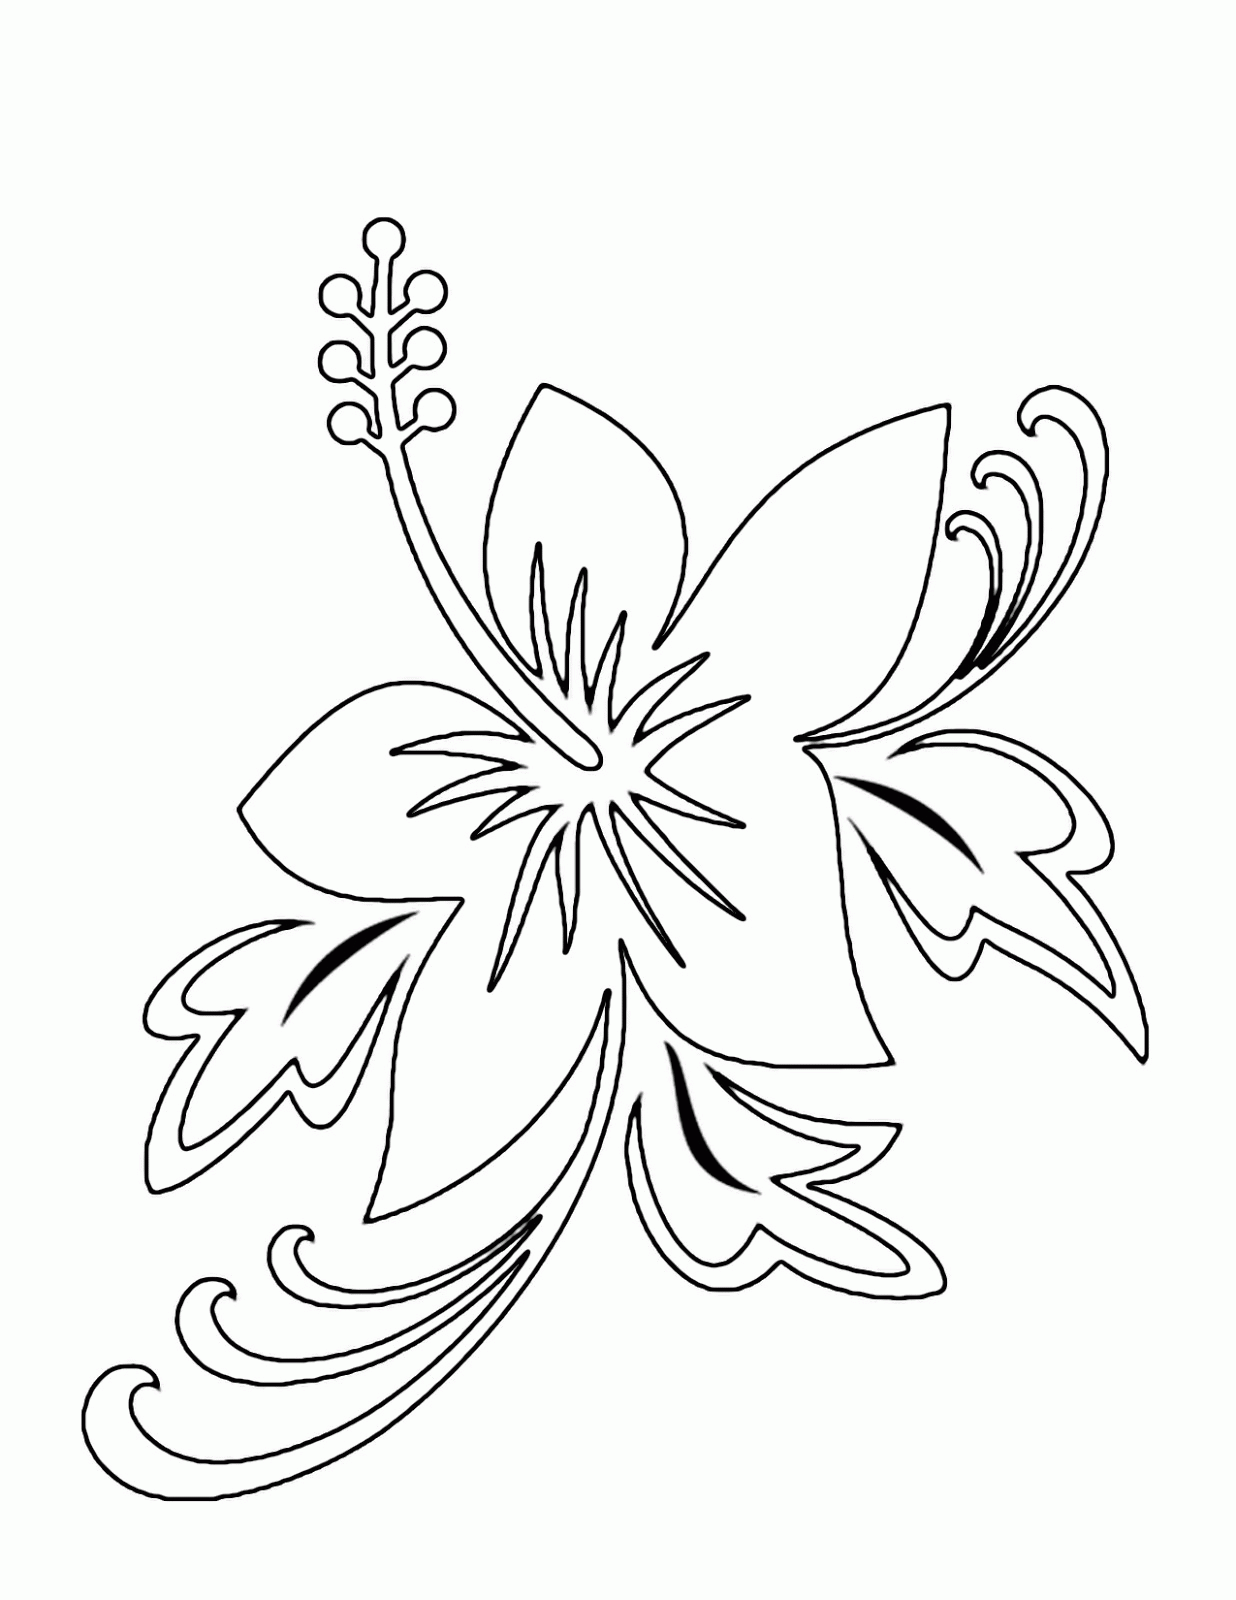 coloring-pages-for-adults-flowers-2.jpg